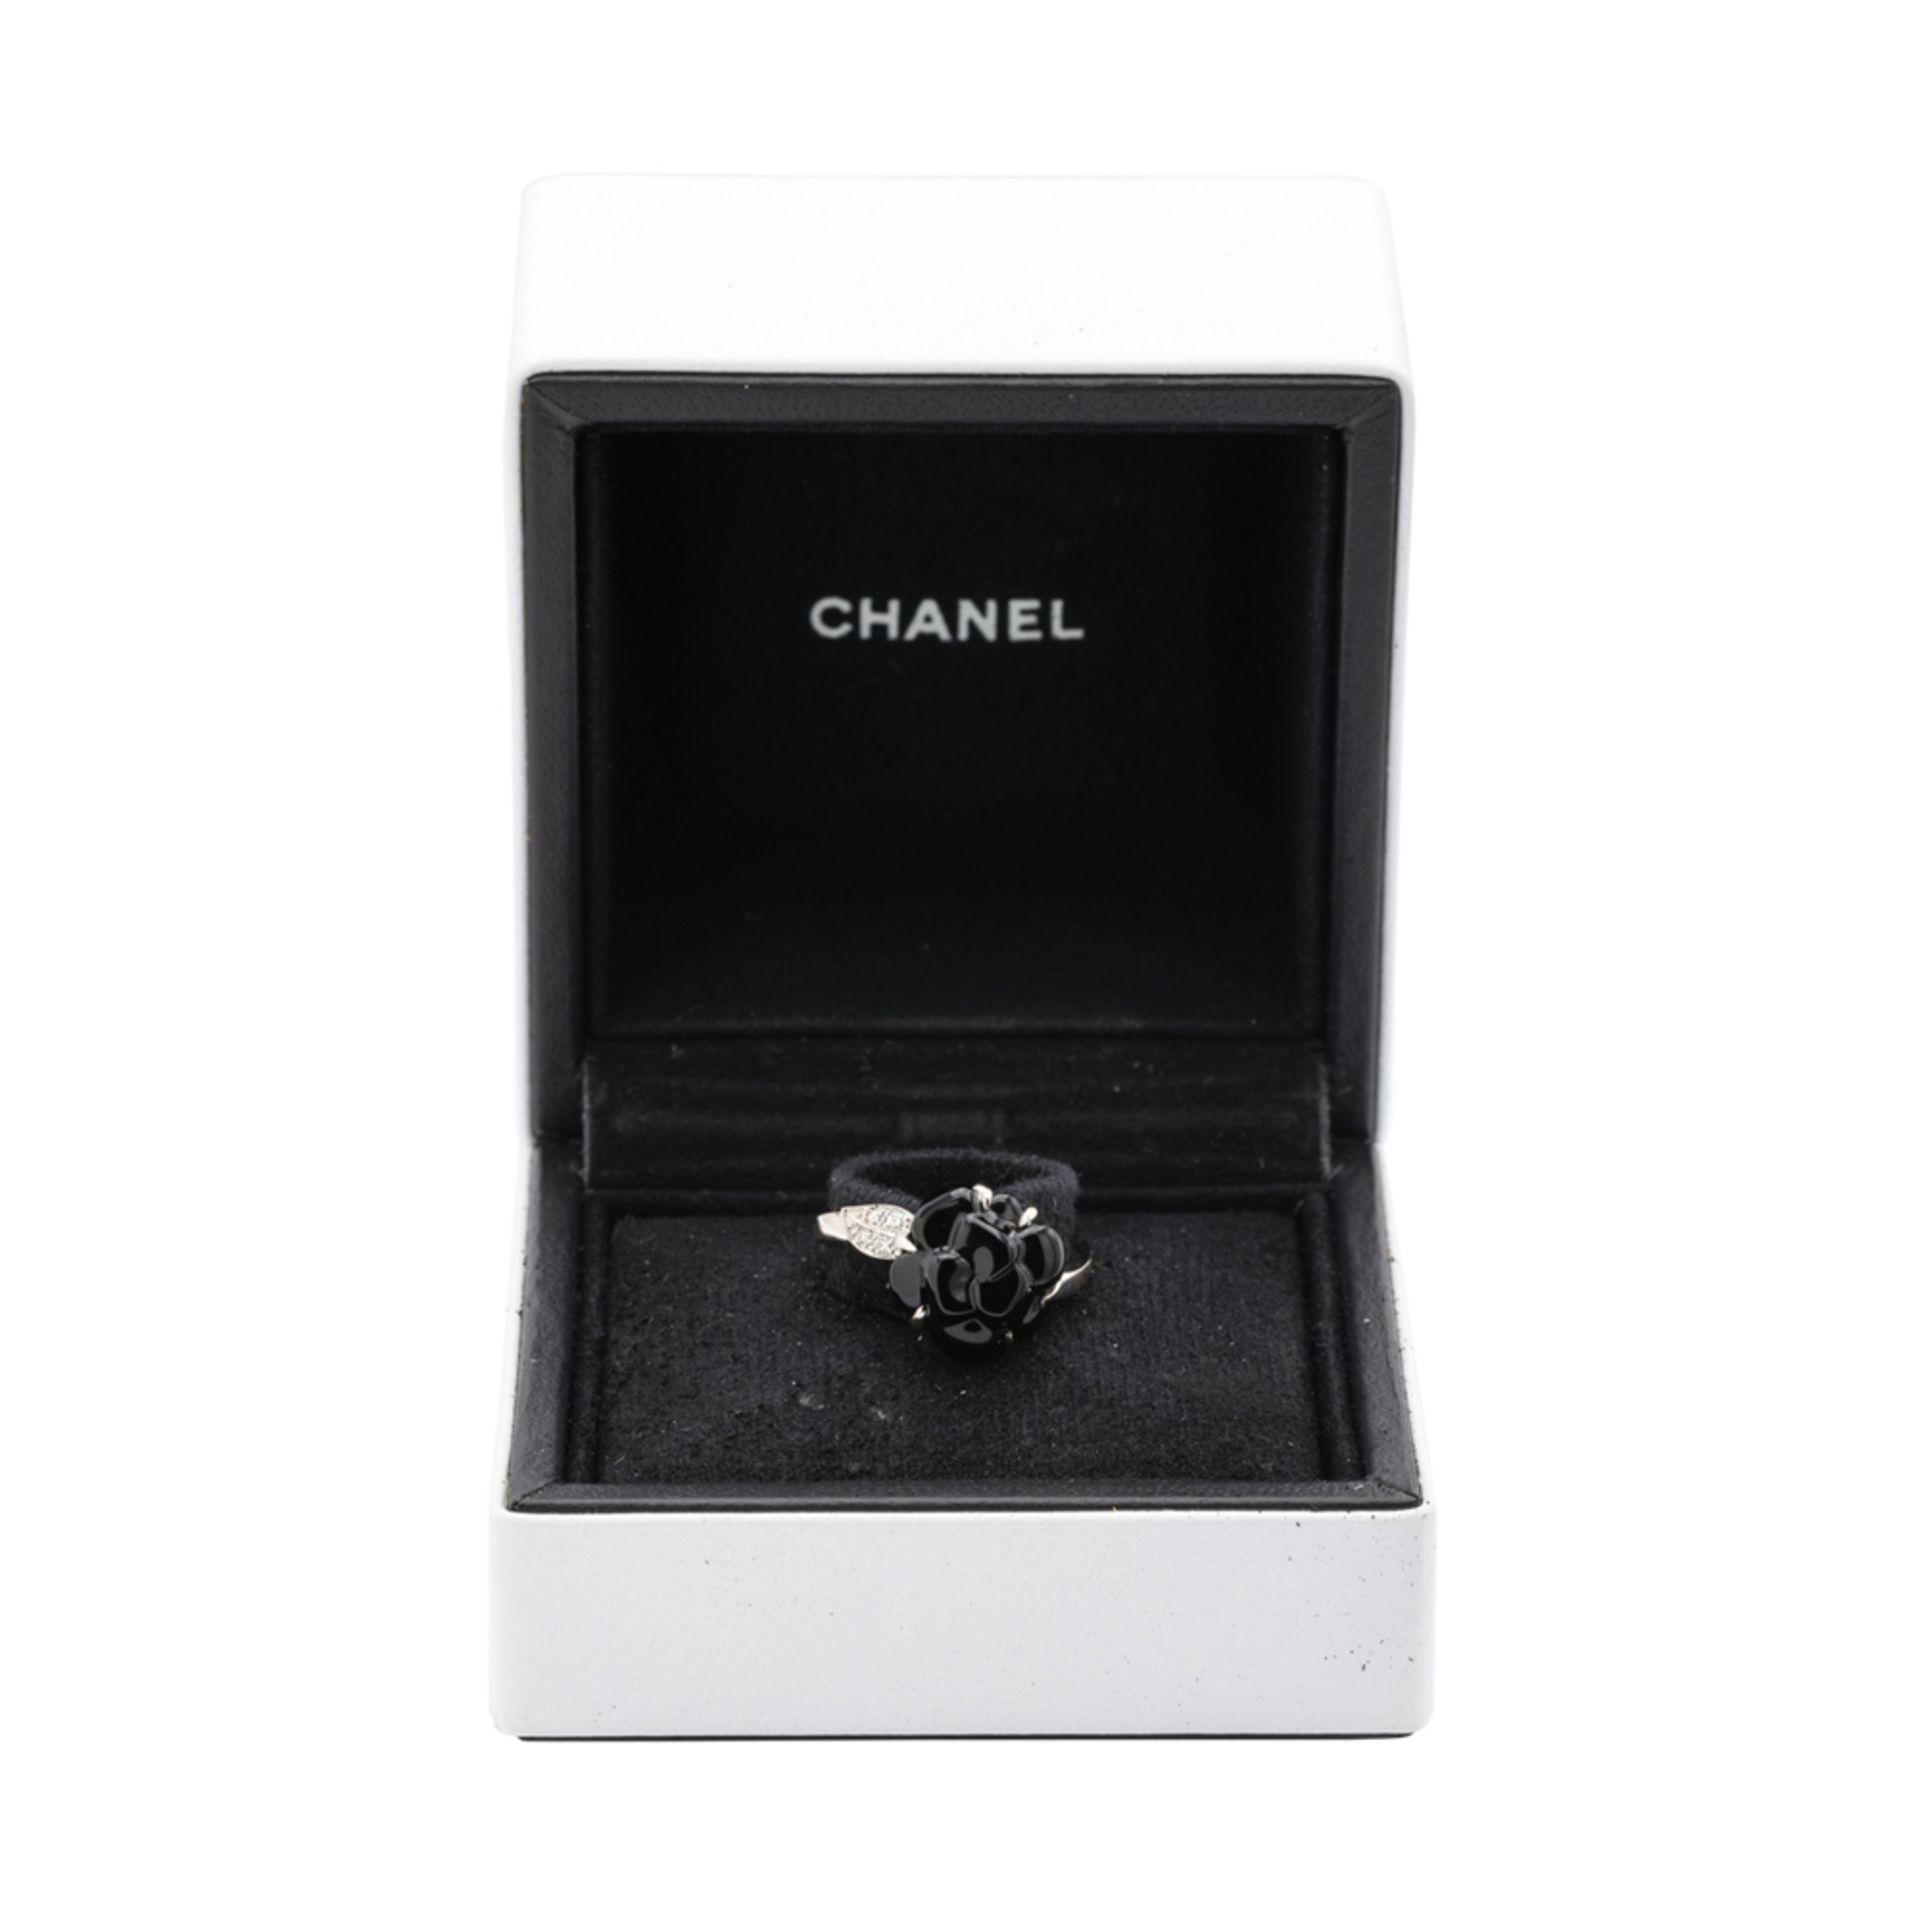 Chanel, Camelia collection ring - Image 2 of 3